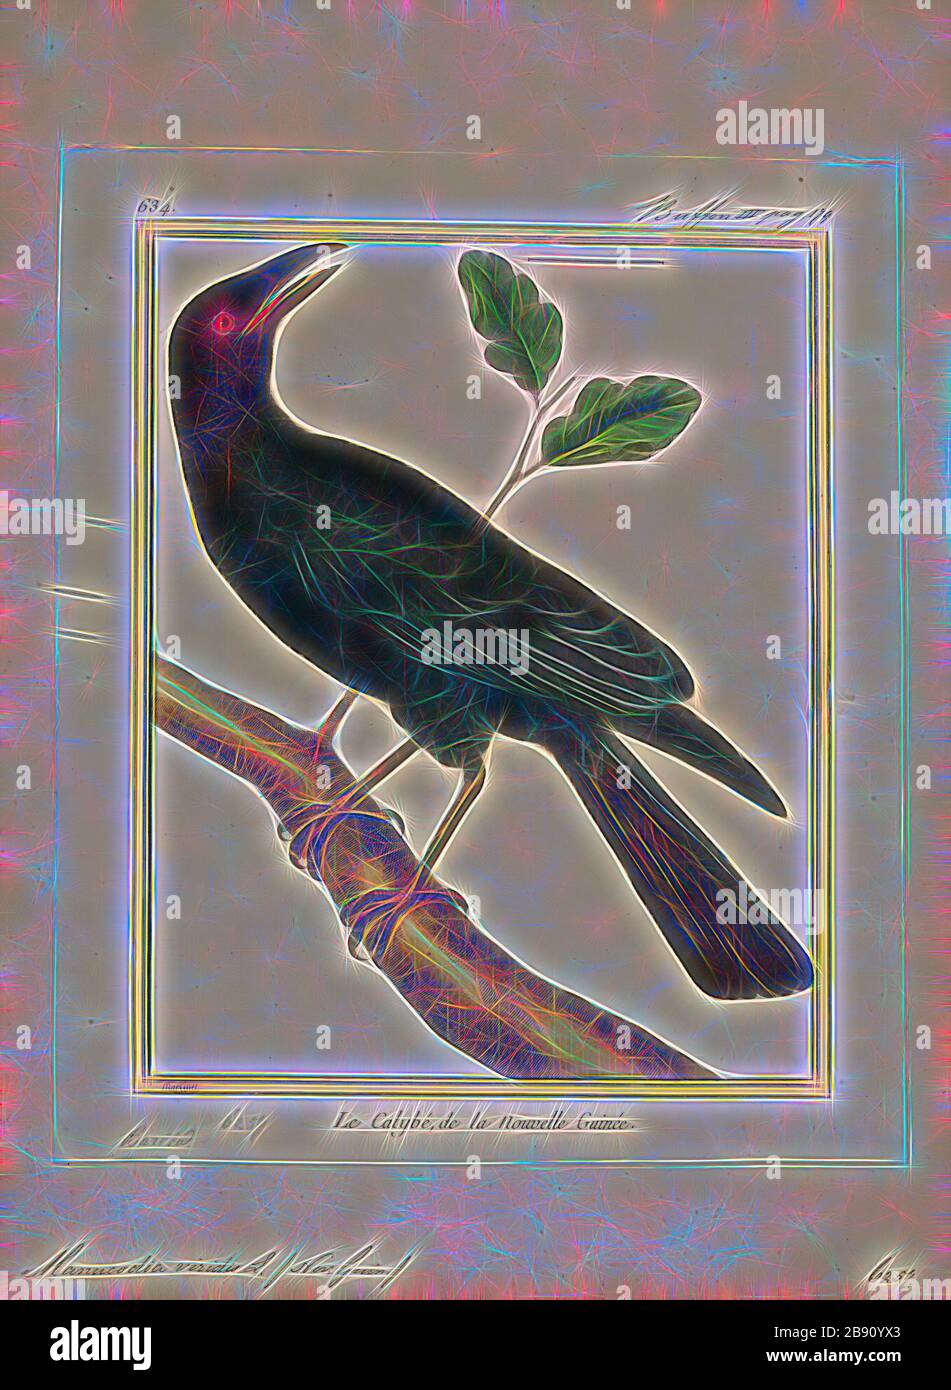 Manucodia viridis, Print, Manucode, Manucodes are birds-of-paradise in the genus Manucodia, that are medium-sized with black-glossed purple and green plumages., Reimagined by Gibon, design of warm cheerful glowing of brightness and light rays radiance. Classic art reinvented with a modern twist. Photography inspired by futurism, embracing dynamic energy of modern technology, movement, speed and revolutionize culture. Stock Photo